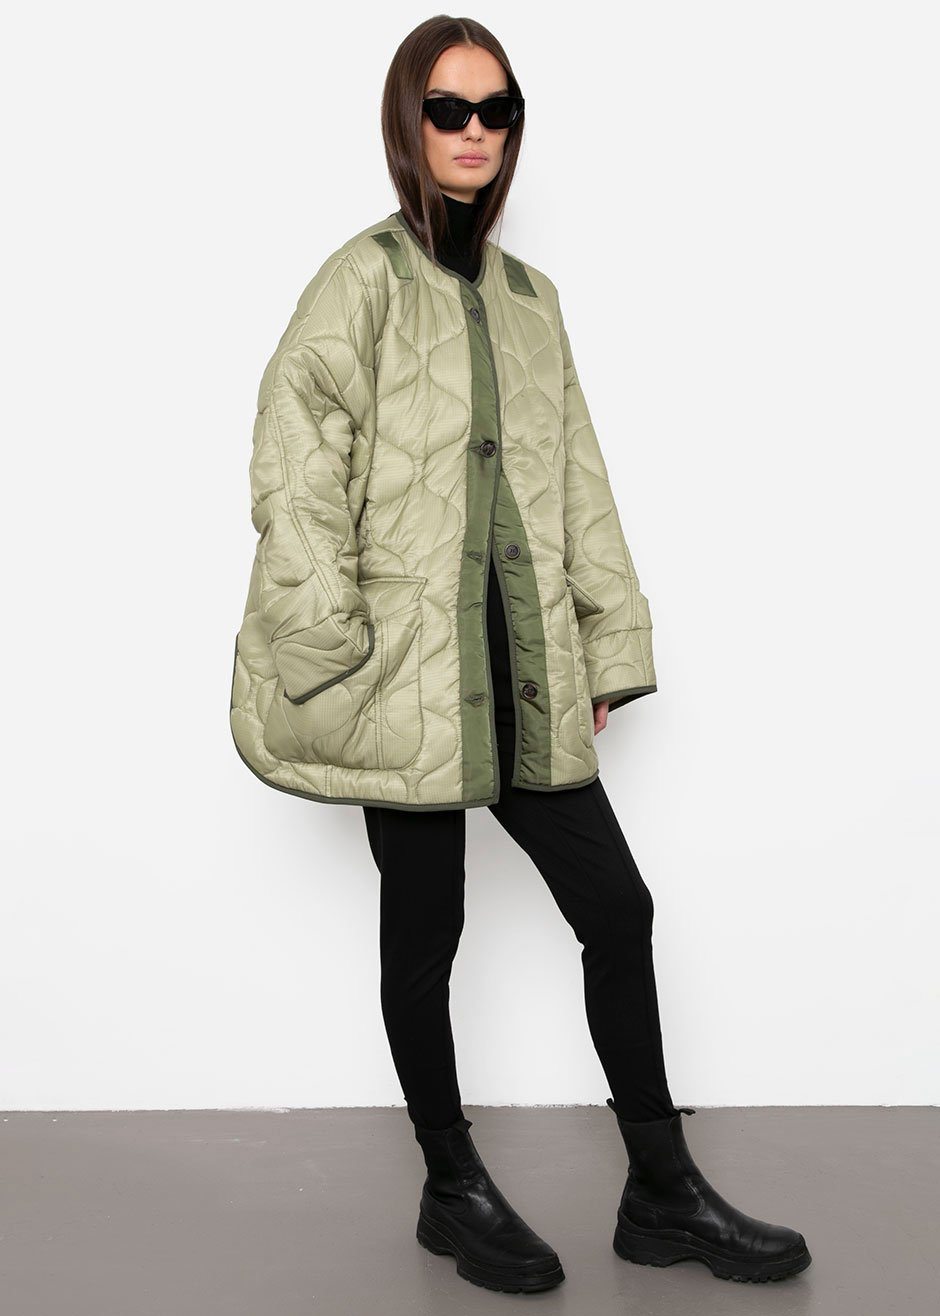 Frankie Shop's Quilted Jacket: Why Everyone's Wearing This Coat